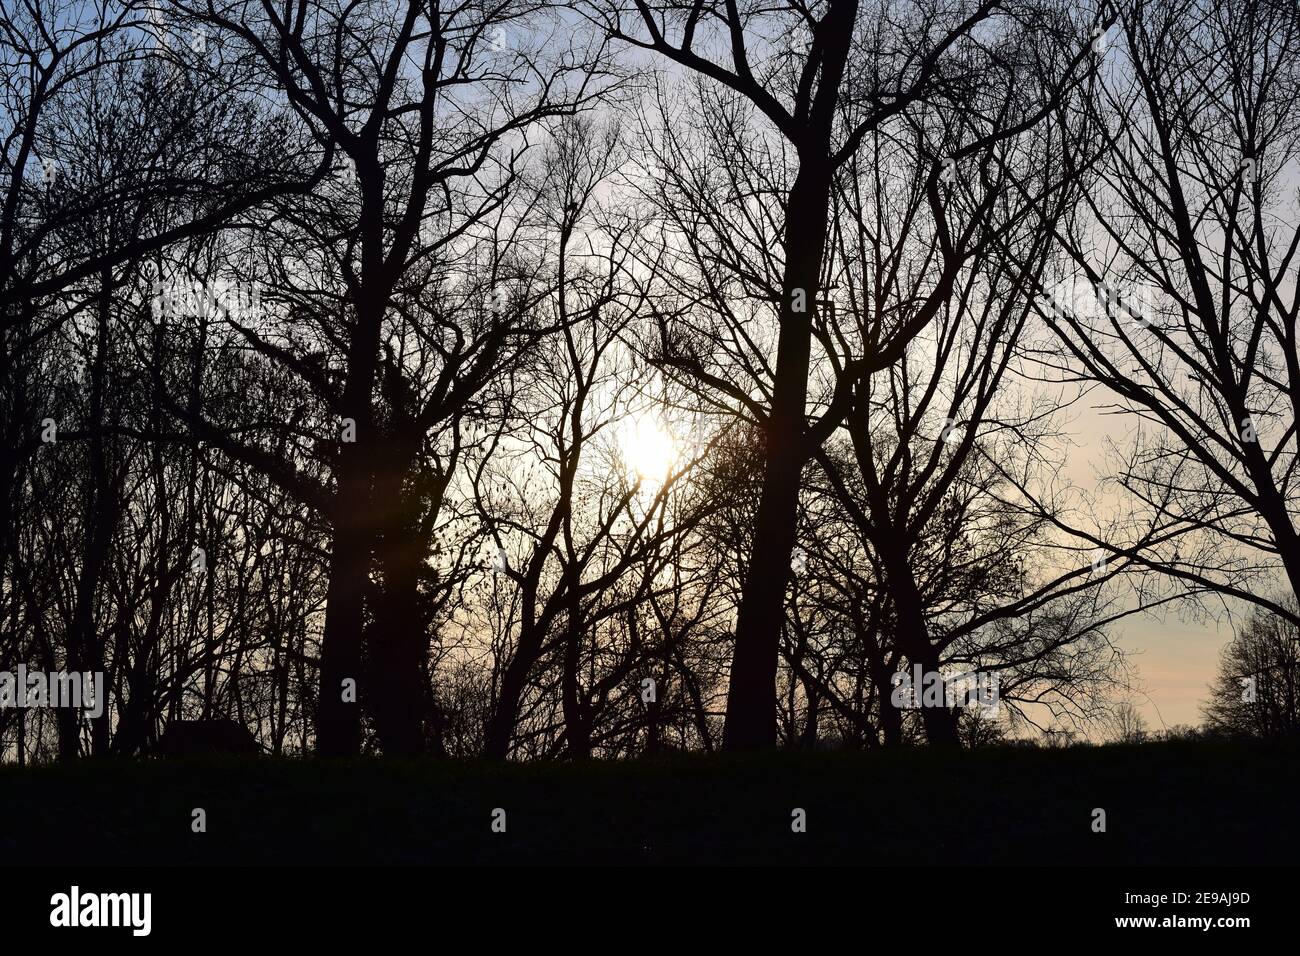 Trees and bushes in winter backlit by a sunset Stock Photo